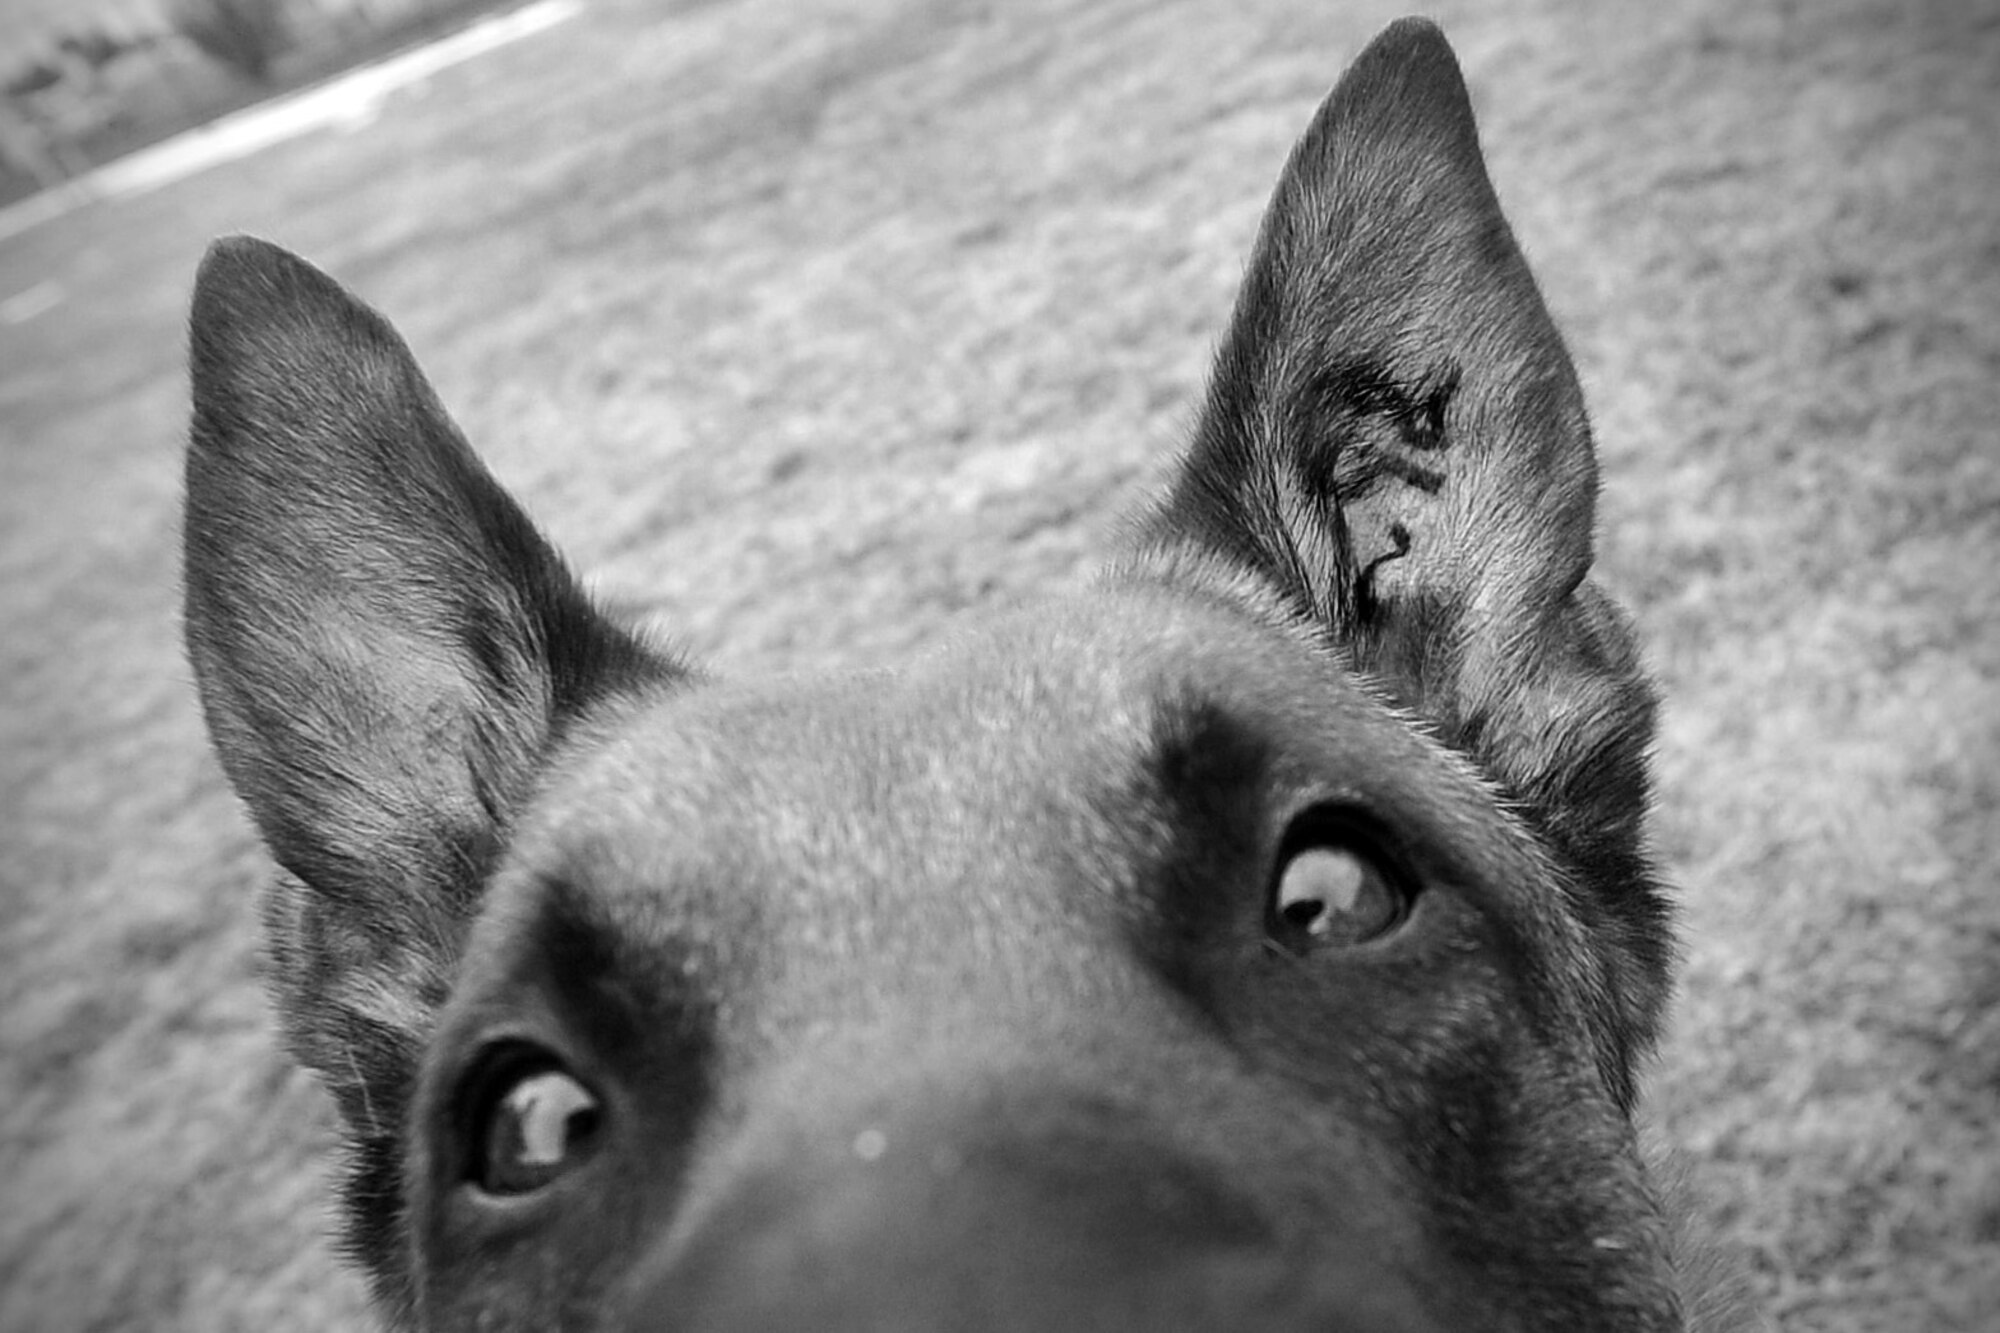 Uutah’s tattoo can be seen in his left ear, signifying the whelp-series the canine was born into represented by one letter and three digits. Uutah is a Belgian Malinois military working dog assigned to the 92nd Security Forces Squadron. (U.S. Air Force photo by Senior Airman Taylor Curry)